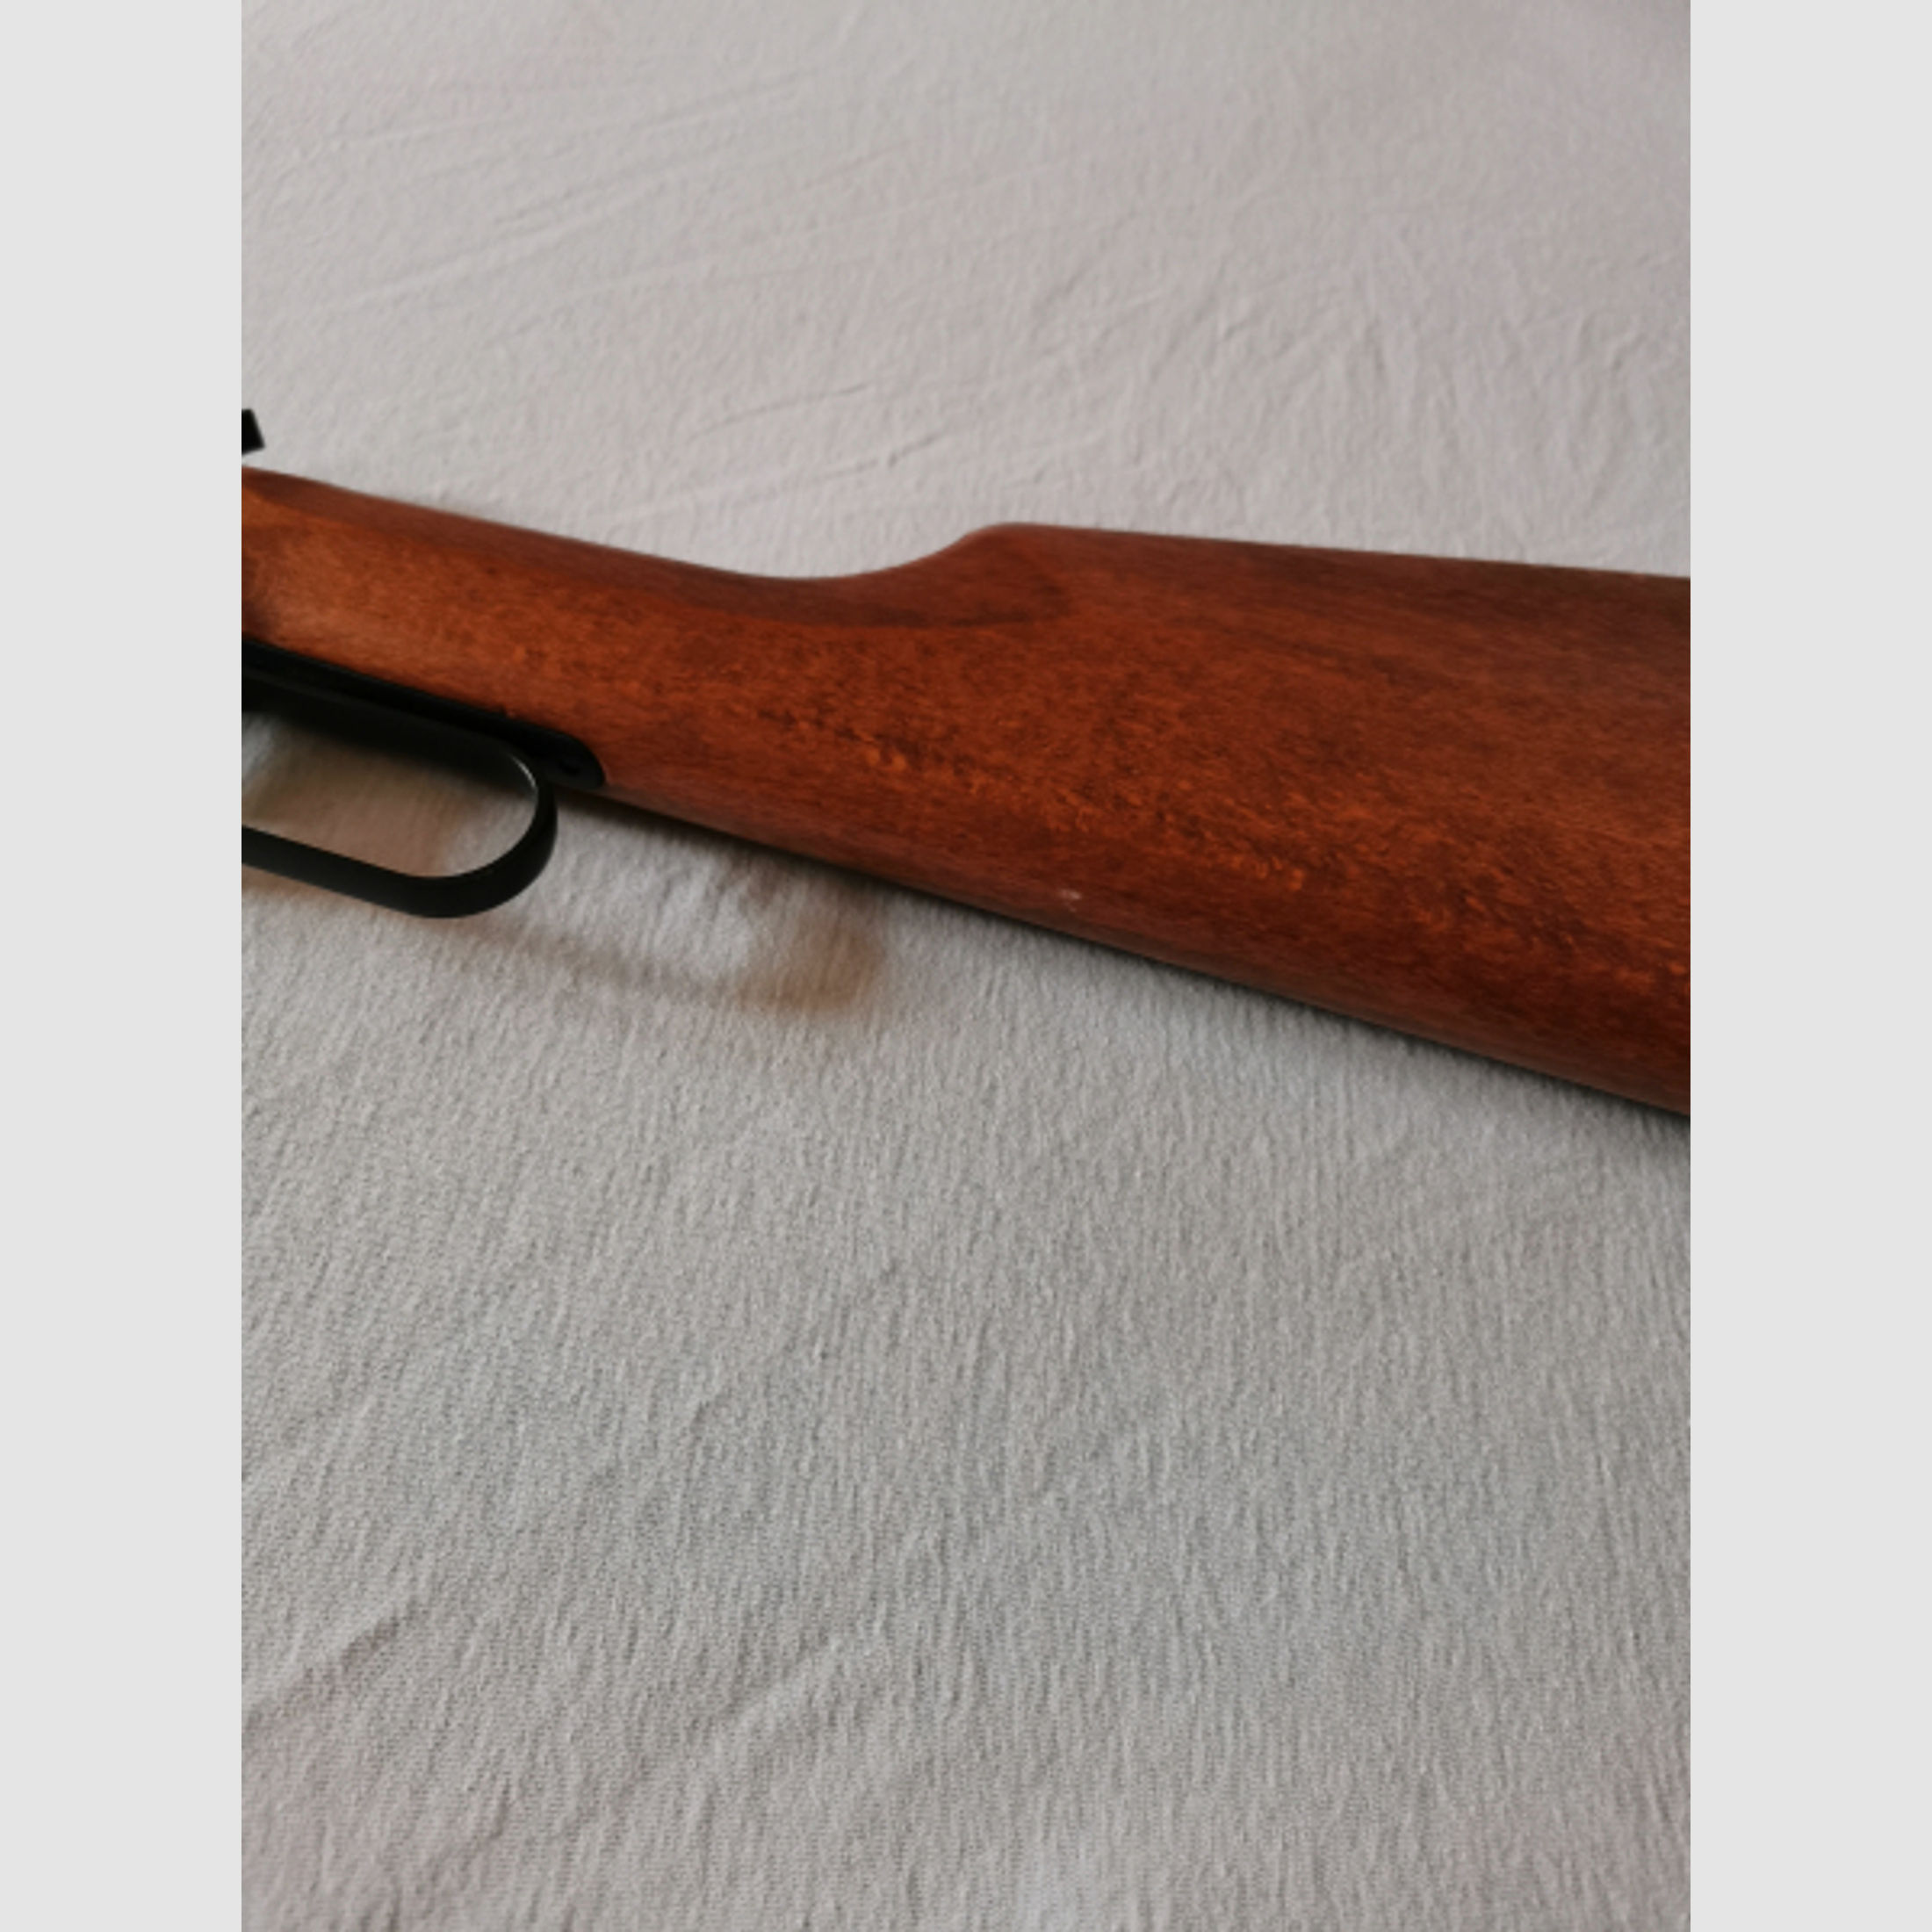 Walther Lever Action long